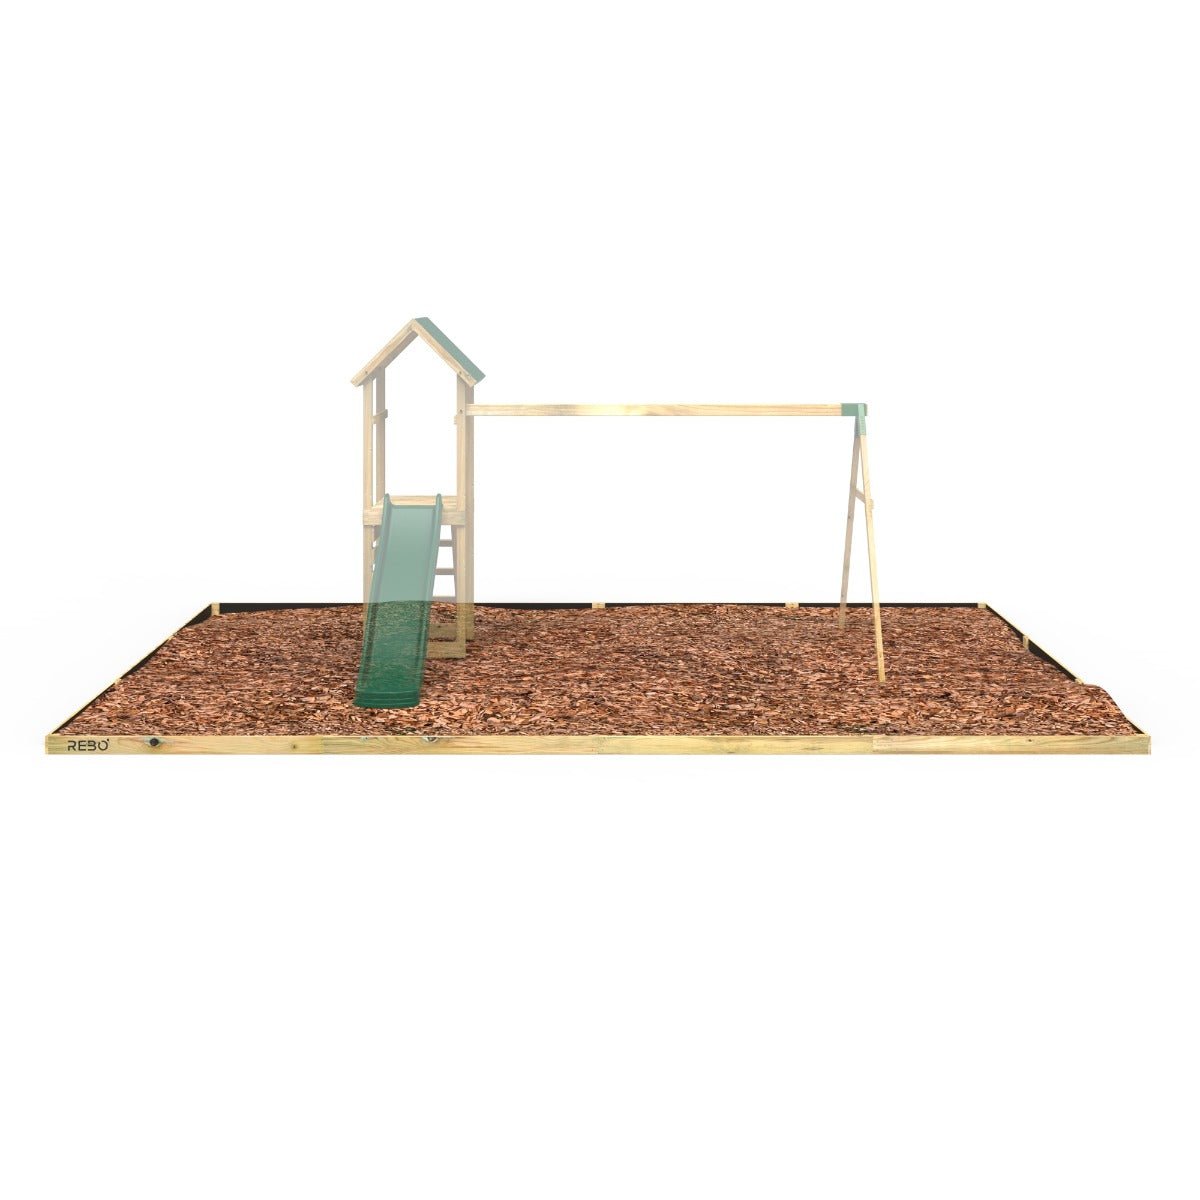 Rebo Safety Play Area Protective Bark Wood Chip Kit - 7.2M x 5.1M